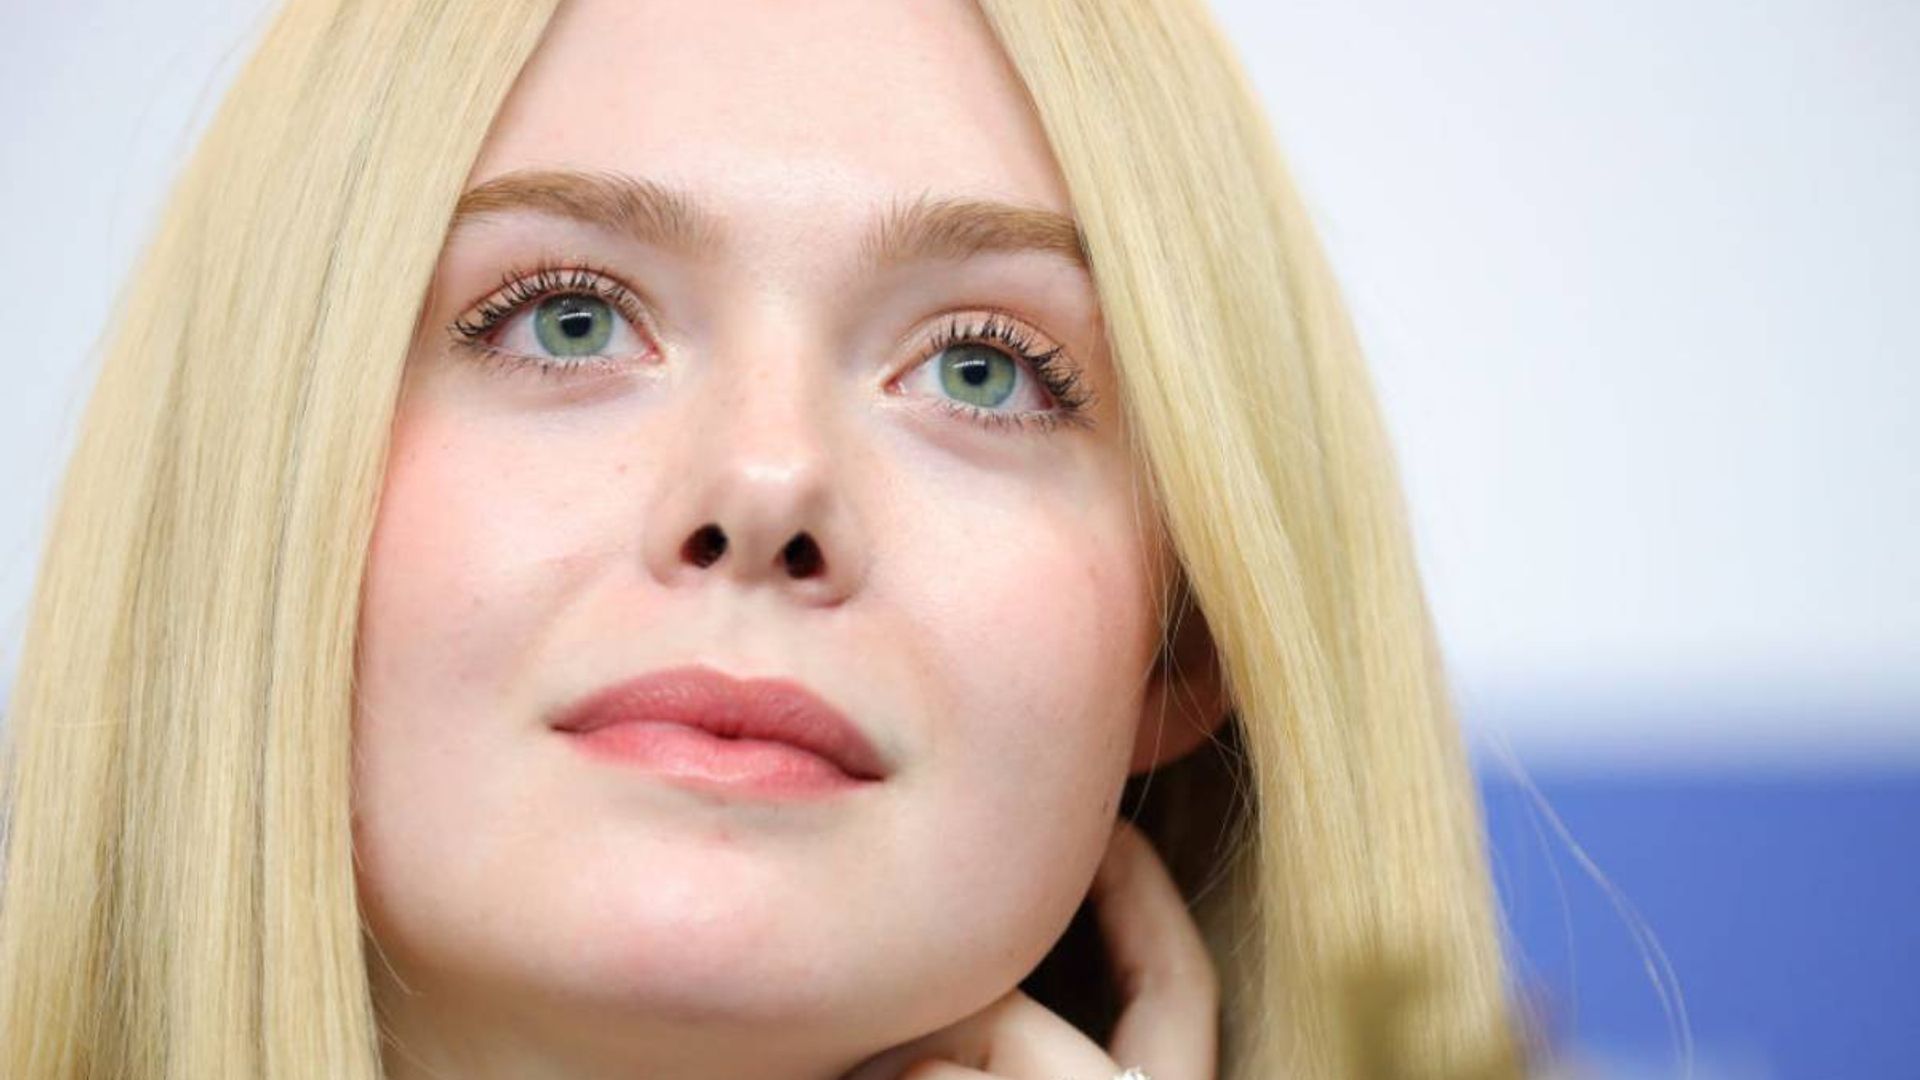 The Elle Fanning sizzles in swimsuit selfie as she bids farewell to summer | HELLO!